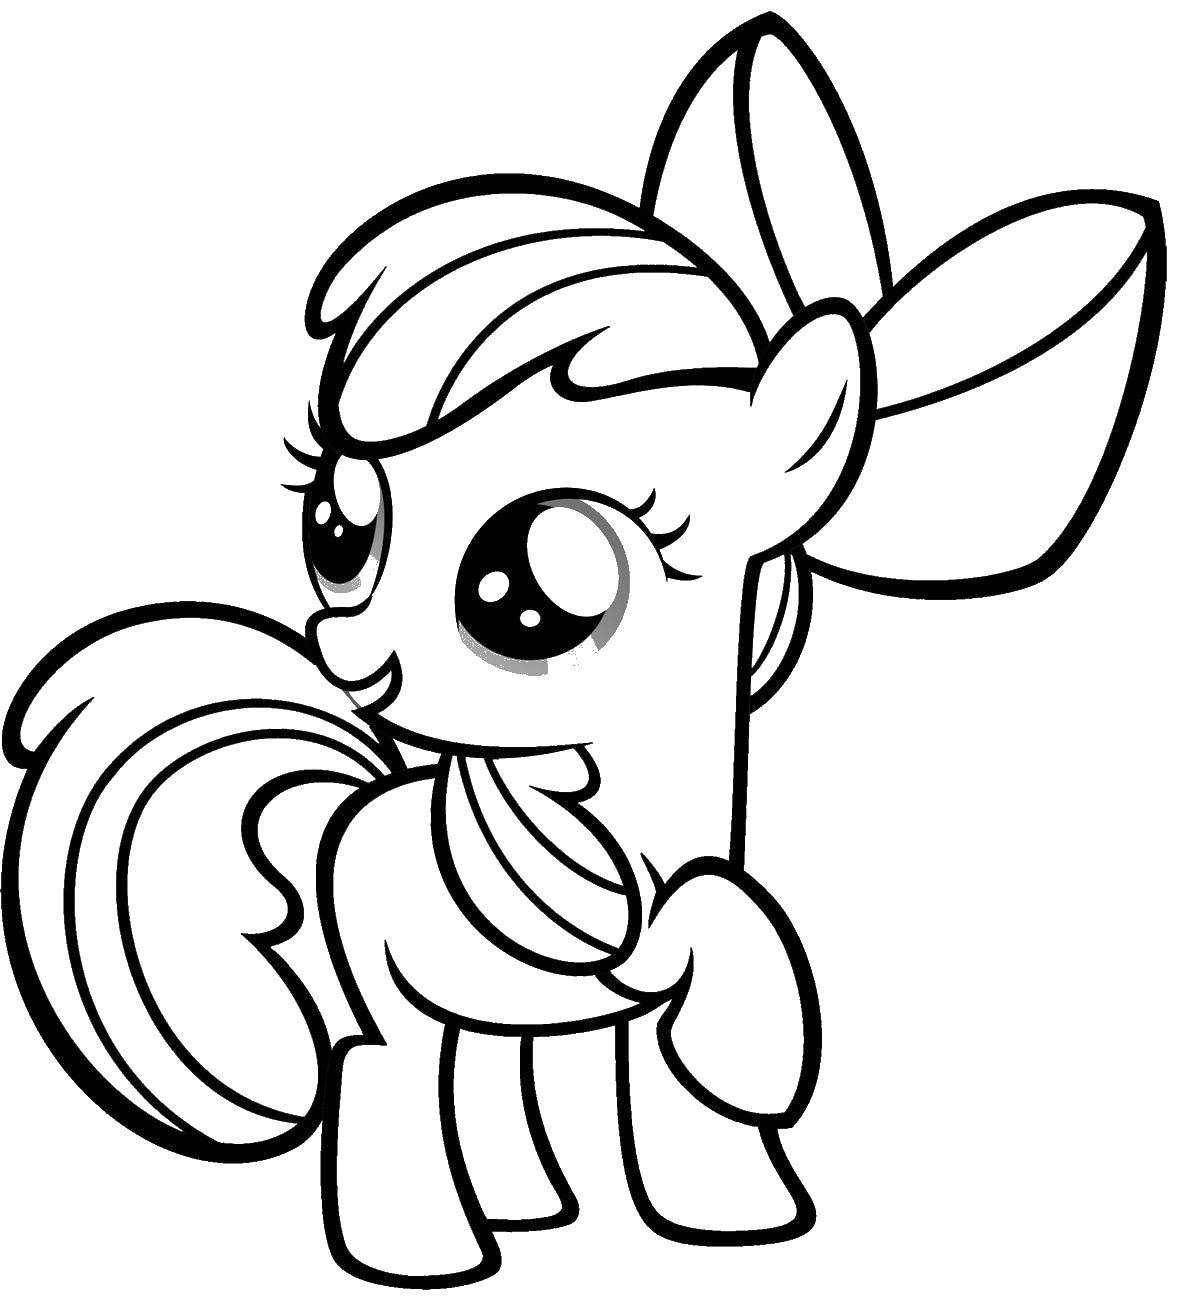 Coloring Pony with bow. Category Ponies. Tags:  ponies, horses, bows.